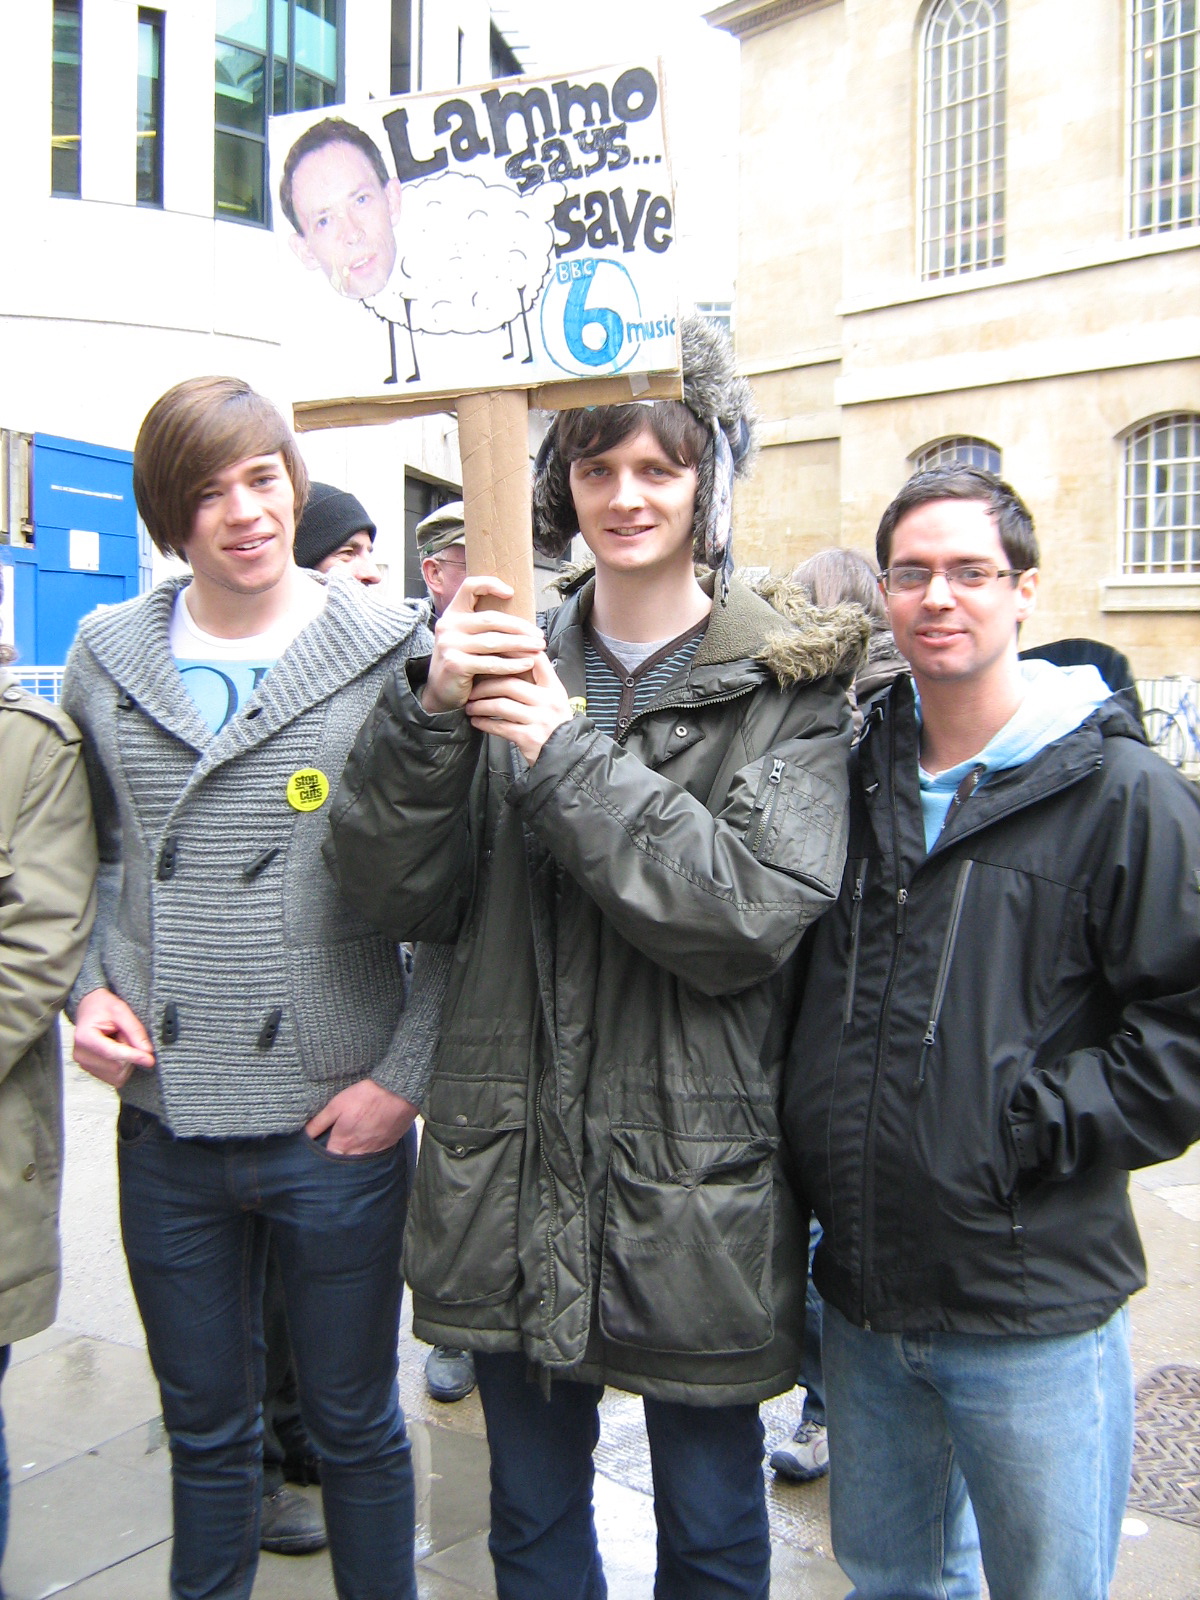  Mikey, Steve, Jim at the BBC Radio 6 Music Protest